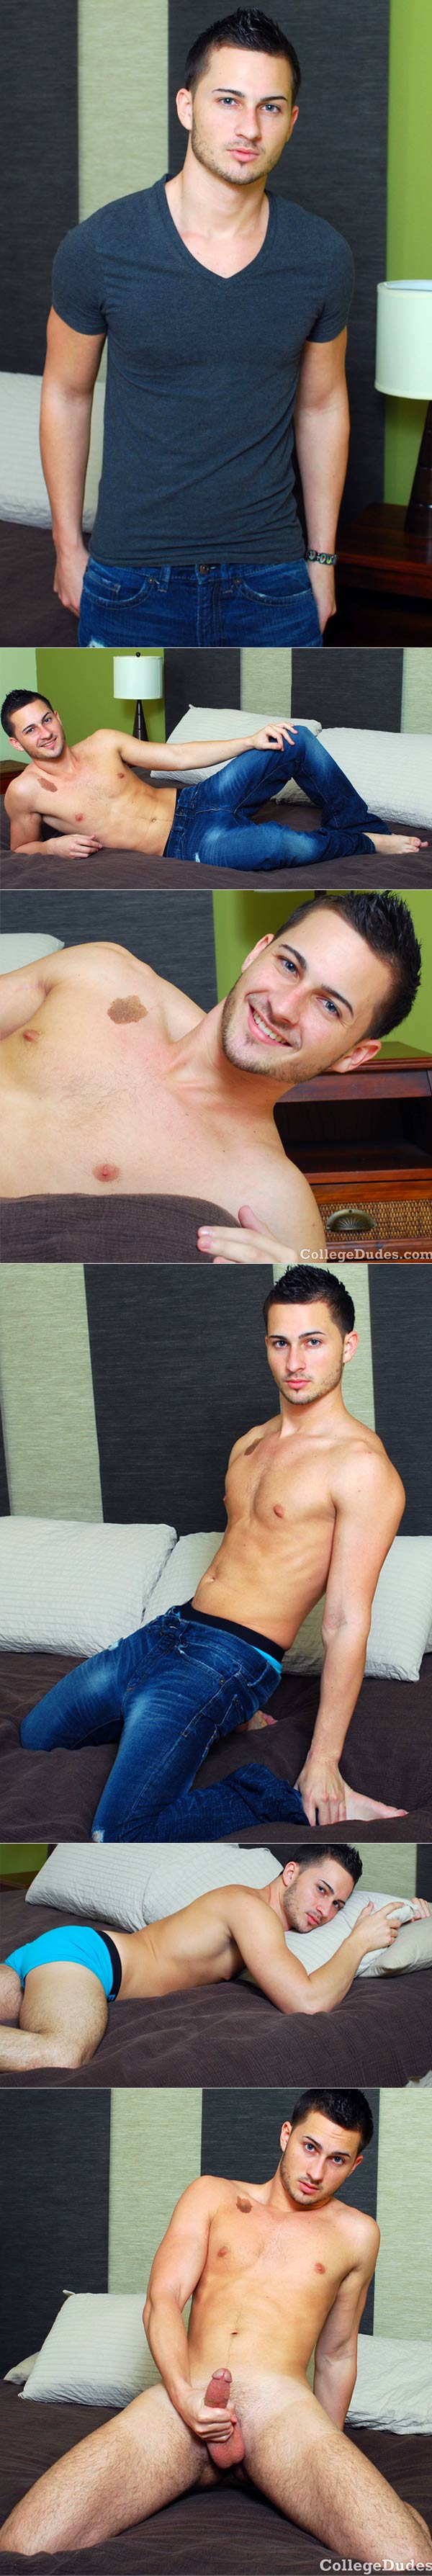 Gino Anzio (Busts A Nut) at CollegeDudes.com